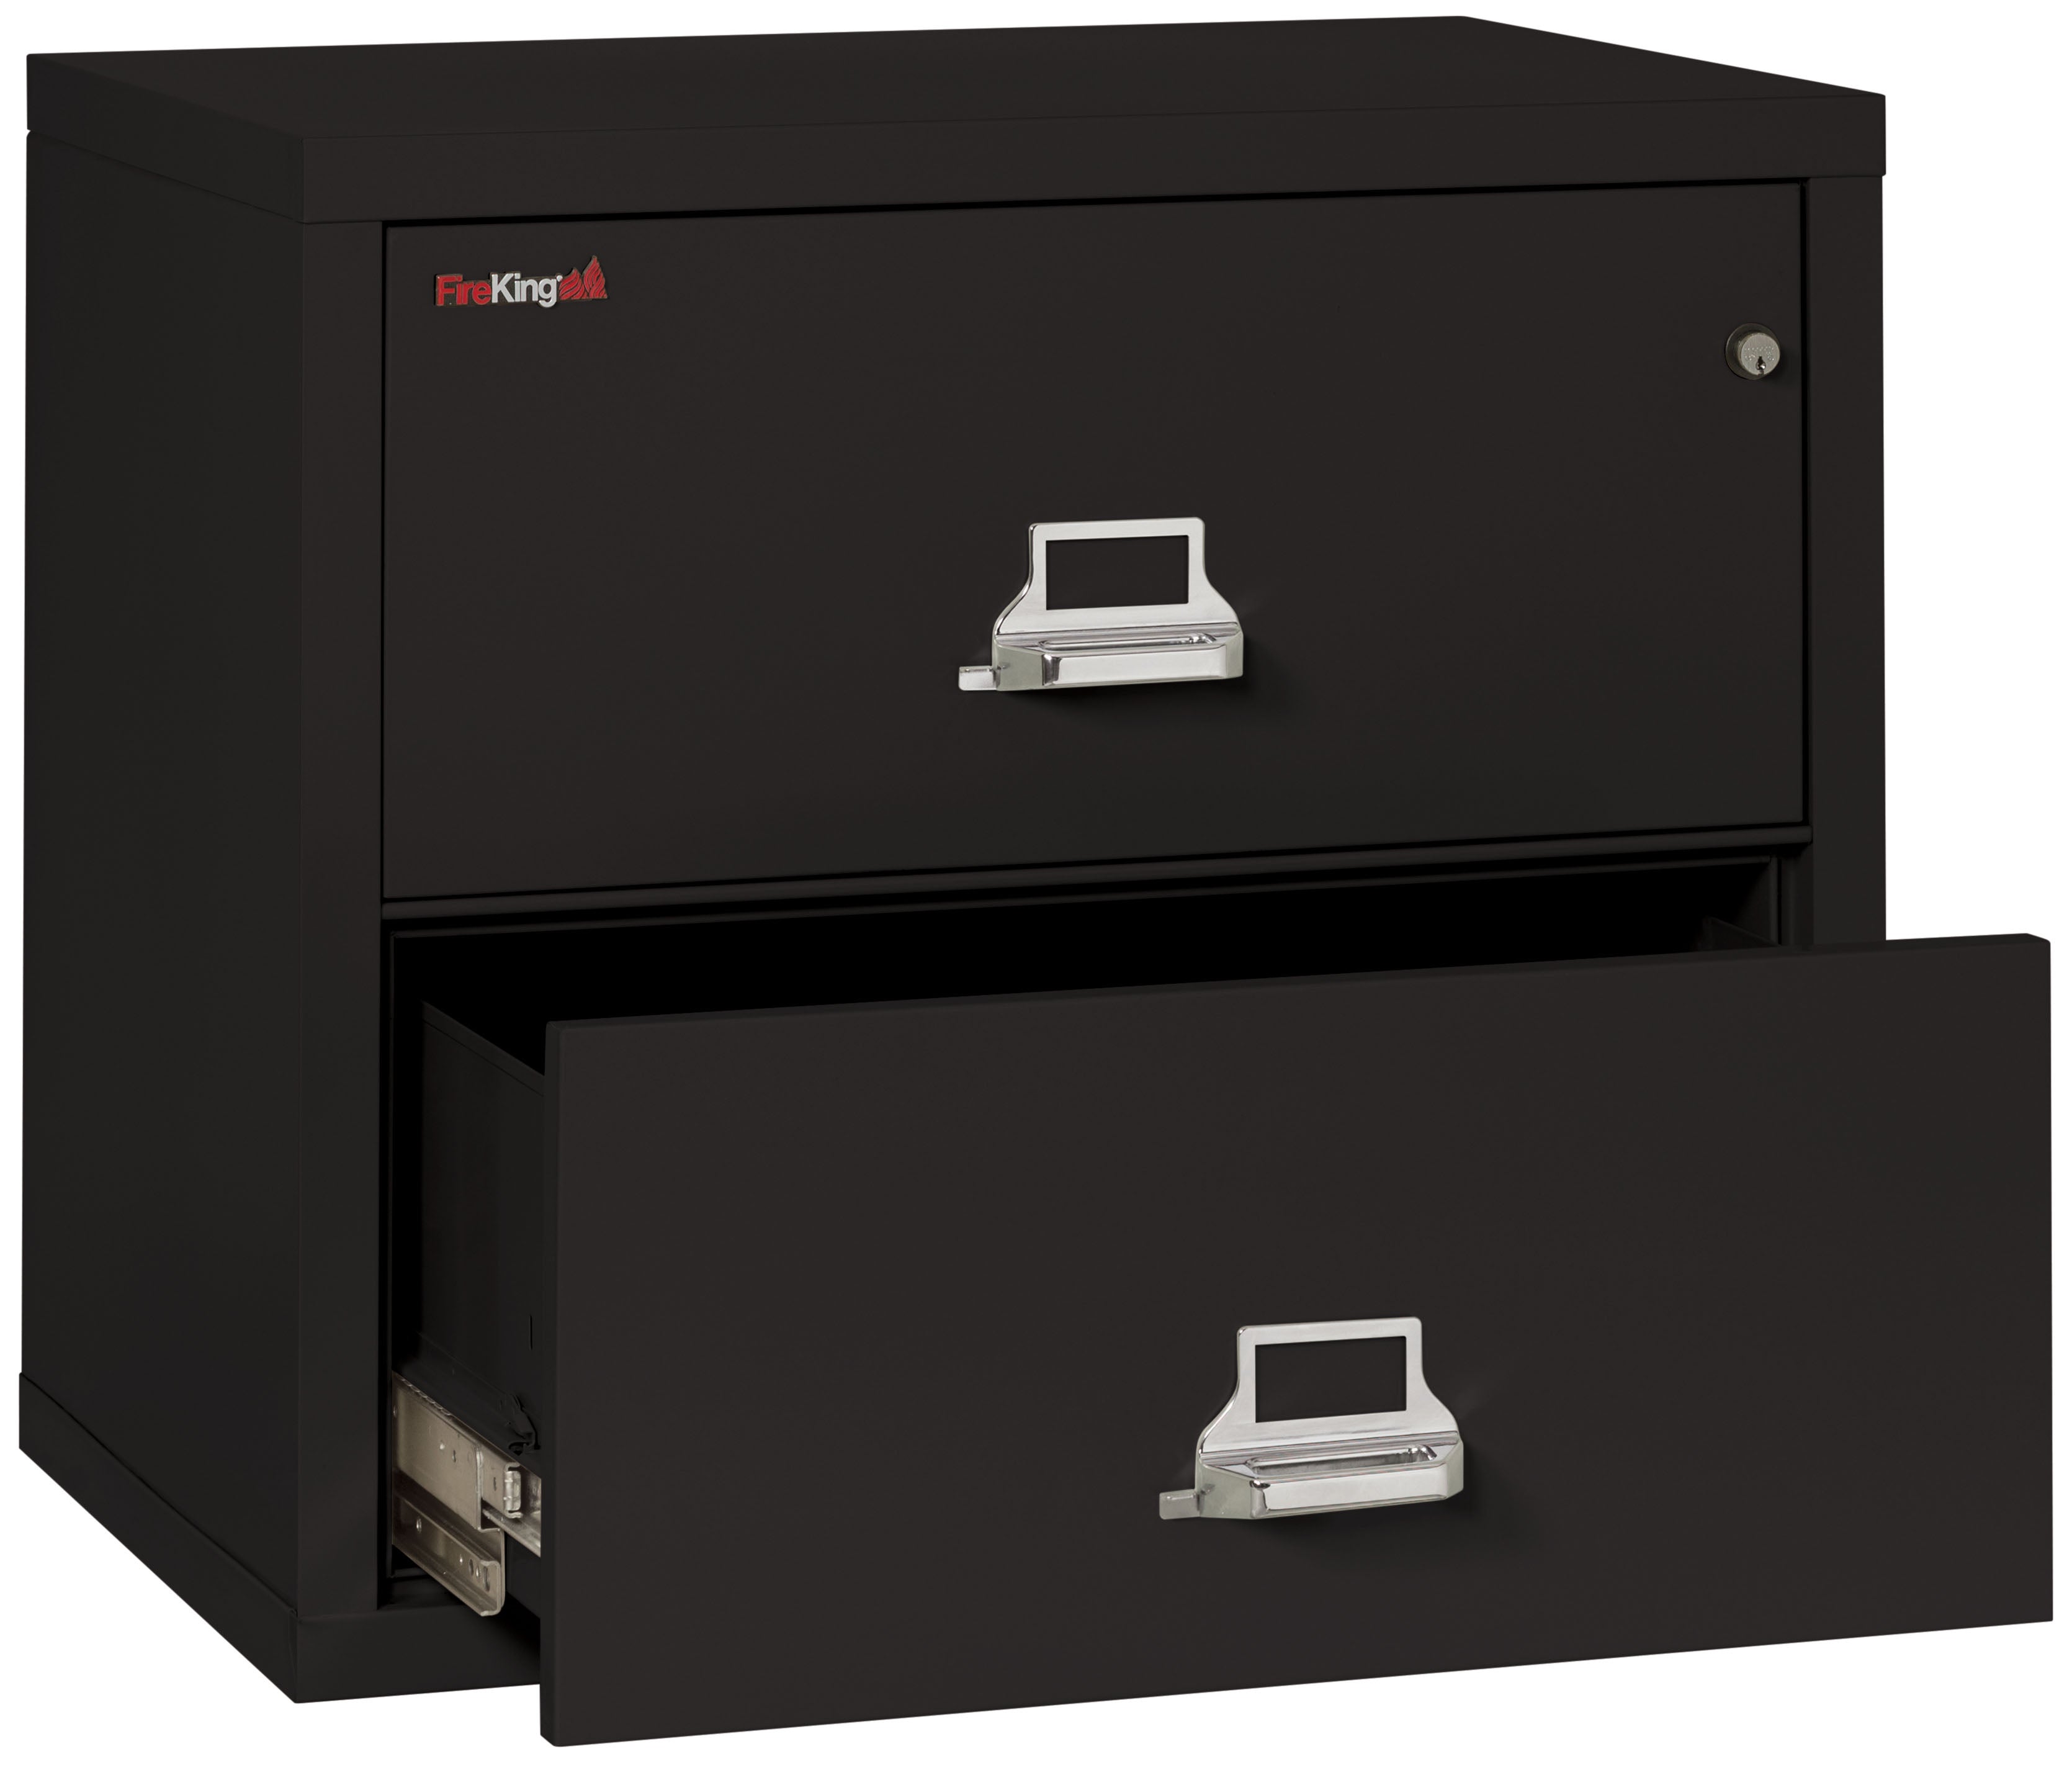 Fire Resistant File Cabinet - 2 Drawer Lateral 31" wide